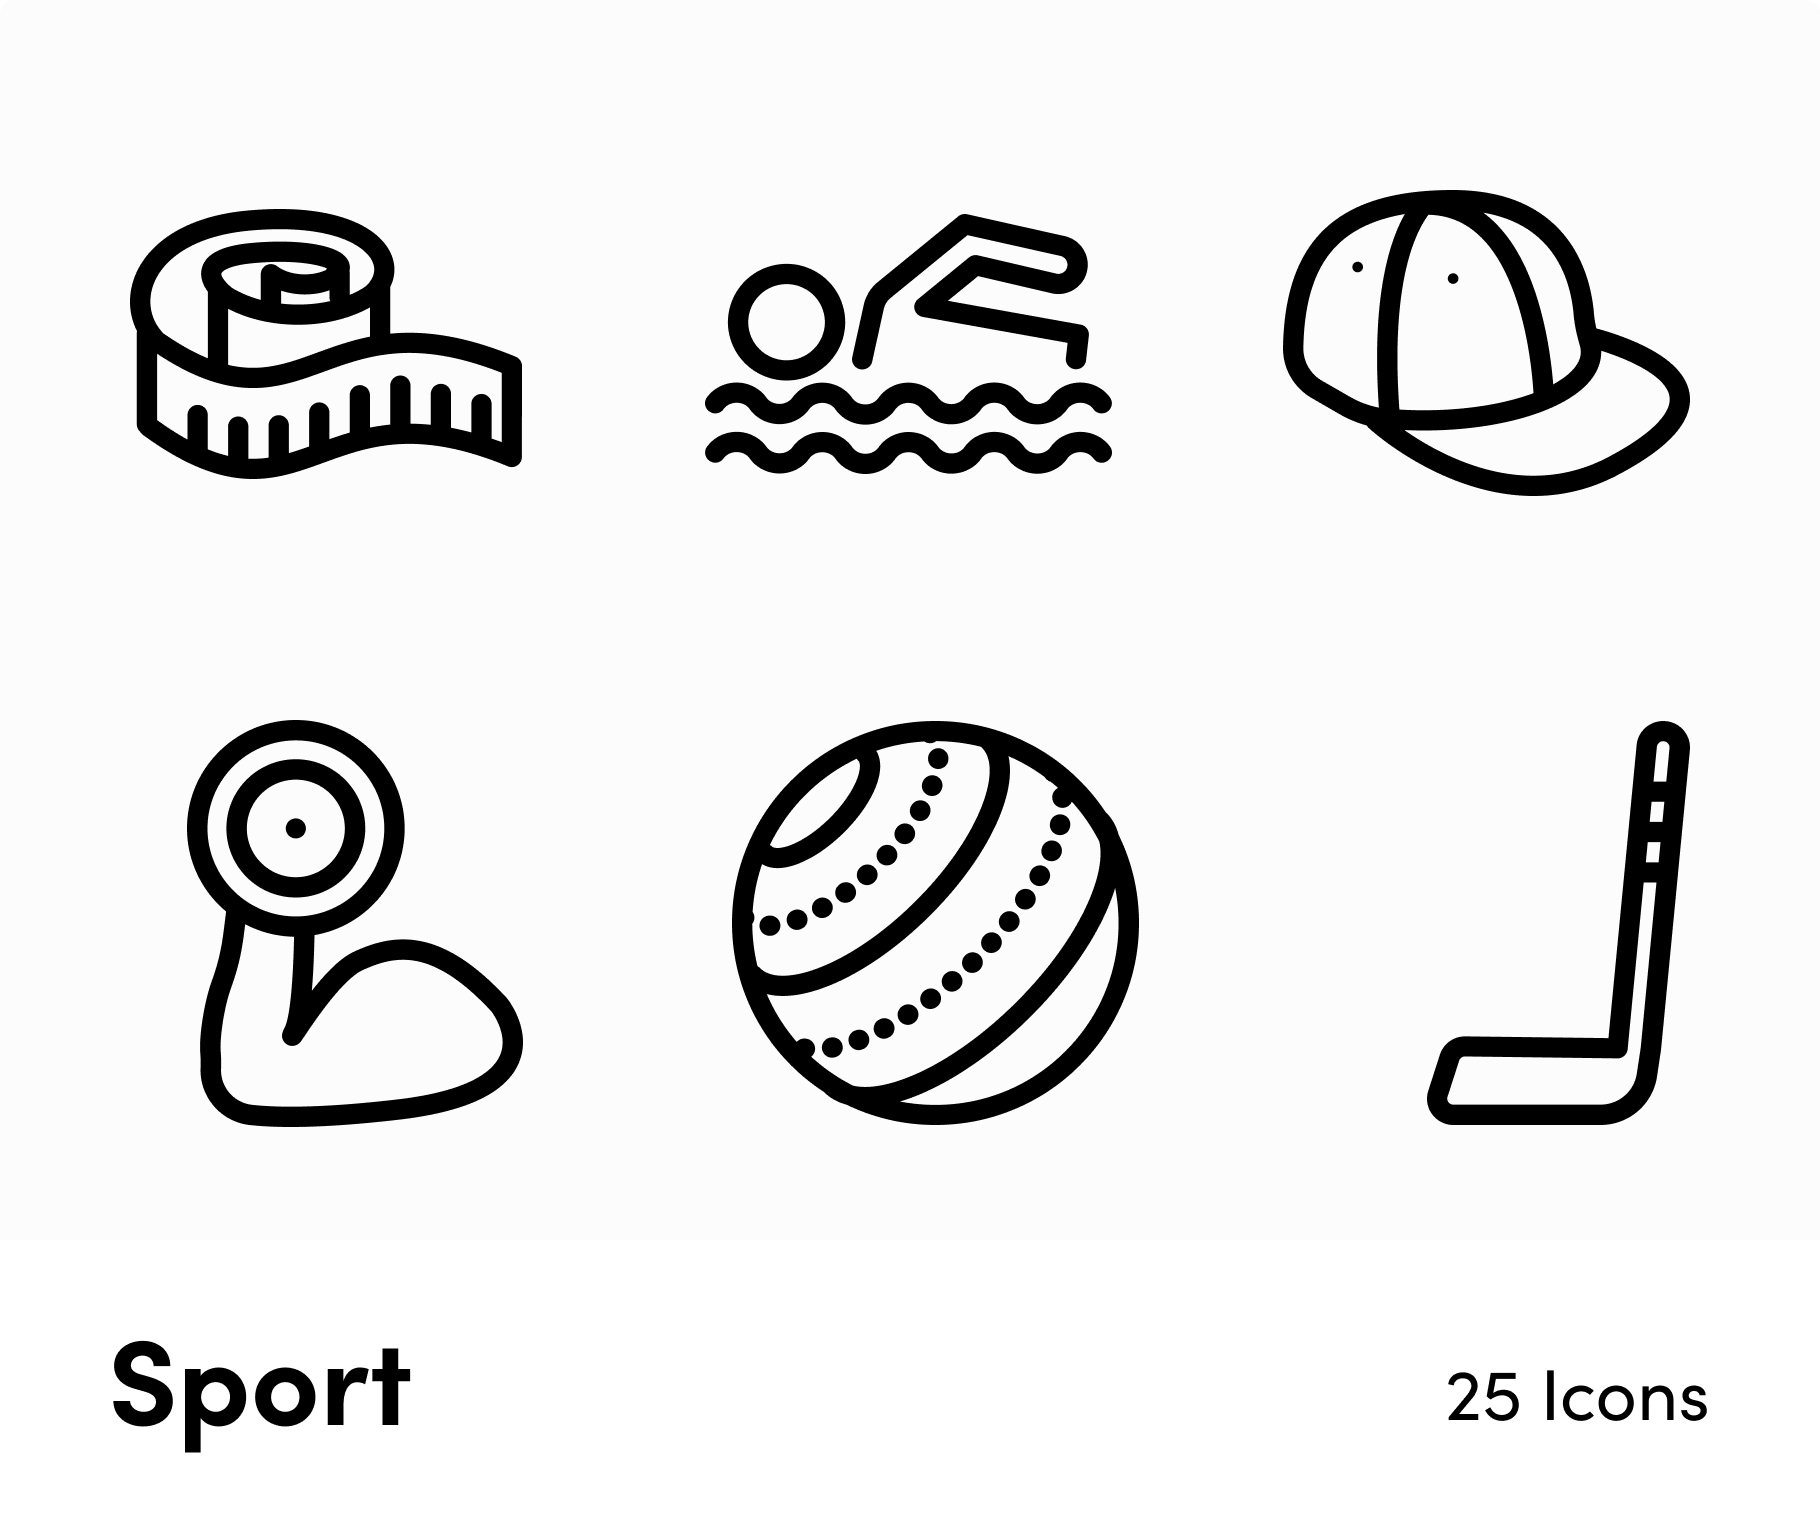 Man and Women Running Sport Icon Vector Graphic by sore88 · Creative Fabrica